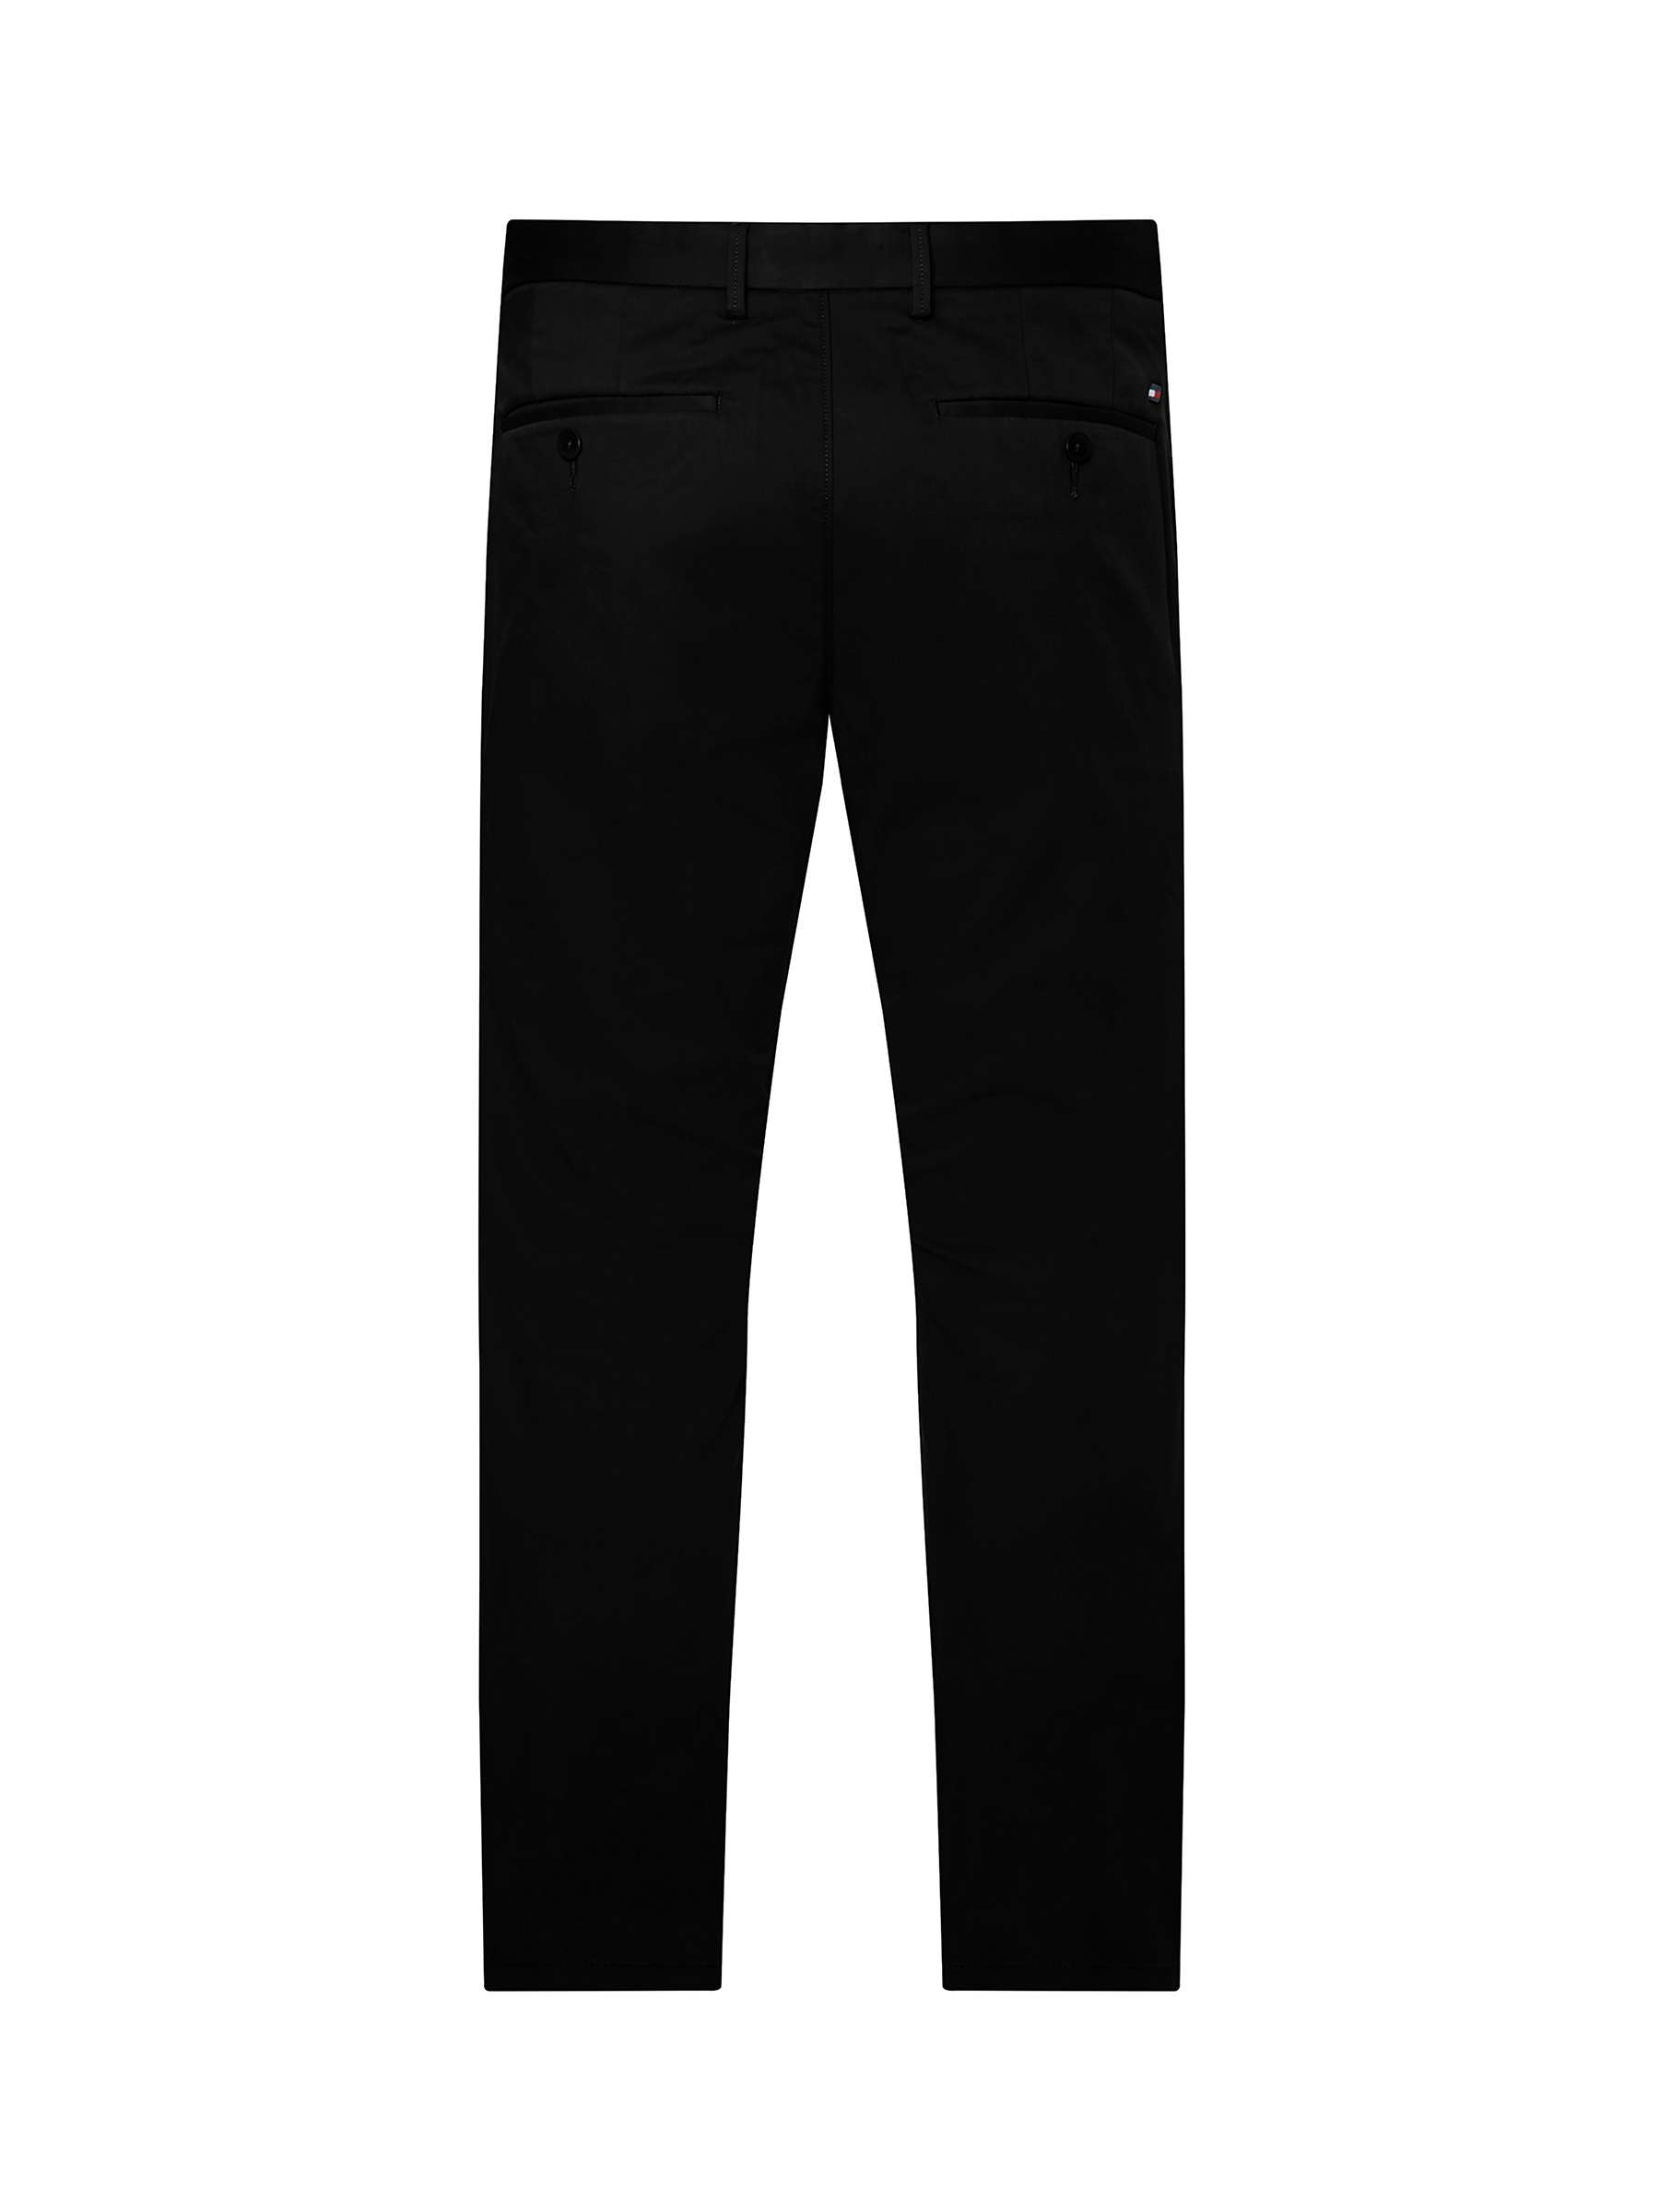 Buy Tommy Hilfiger 1985 Pima Chino Trousers, Black Online at johnlewis.com